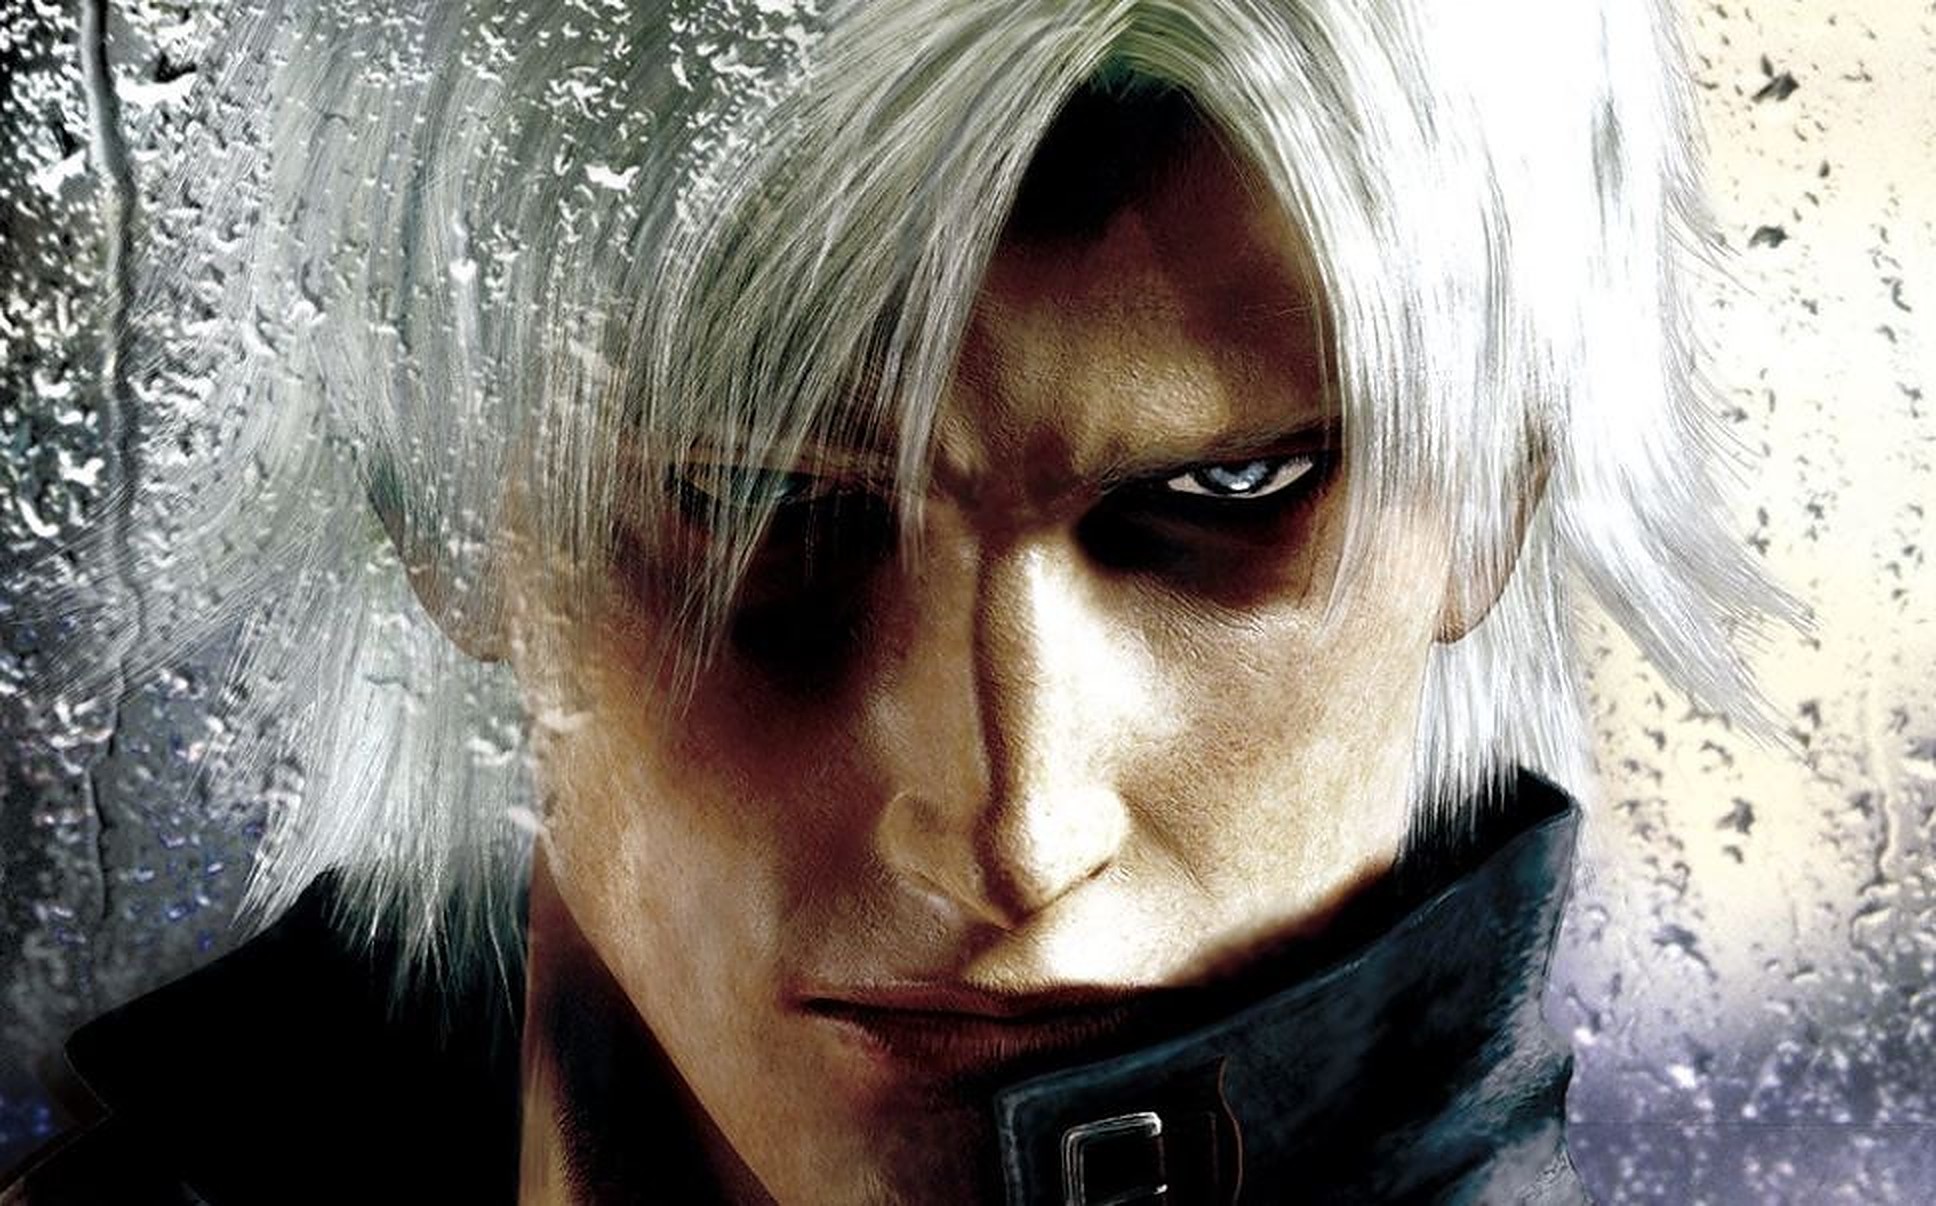 THINGS I REMEMBER: DEVIL MAY CRY 2